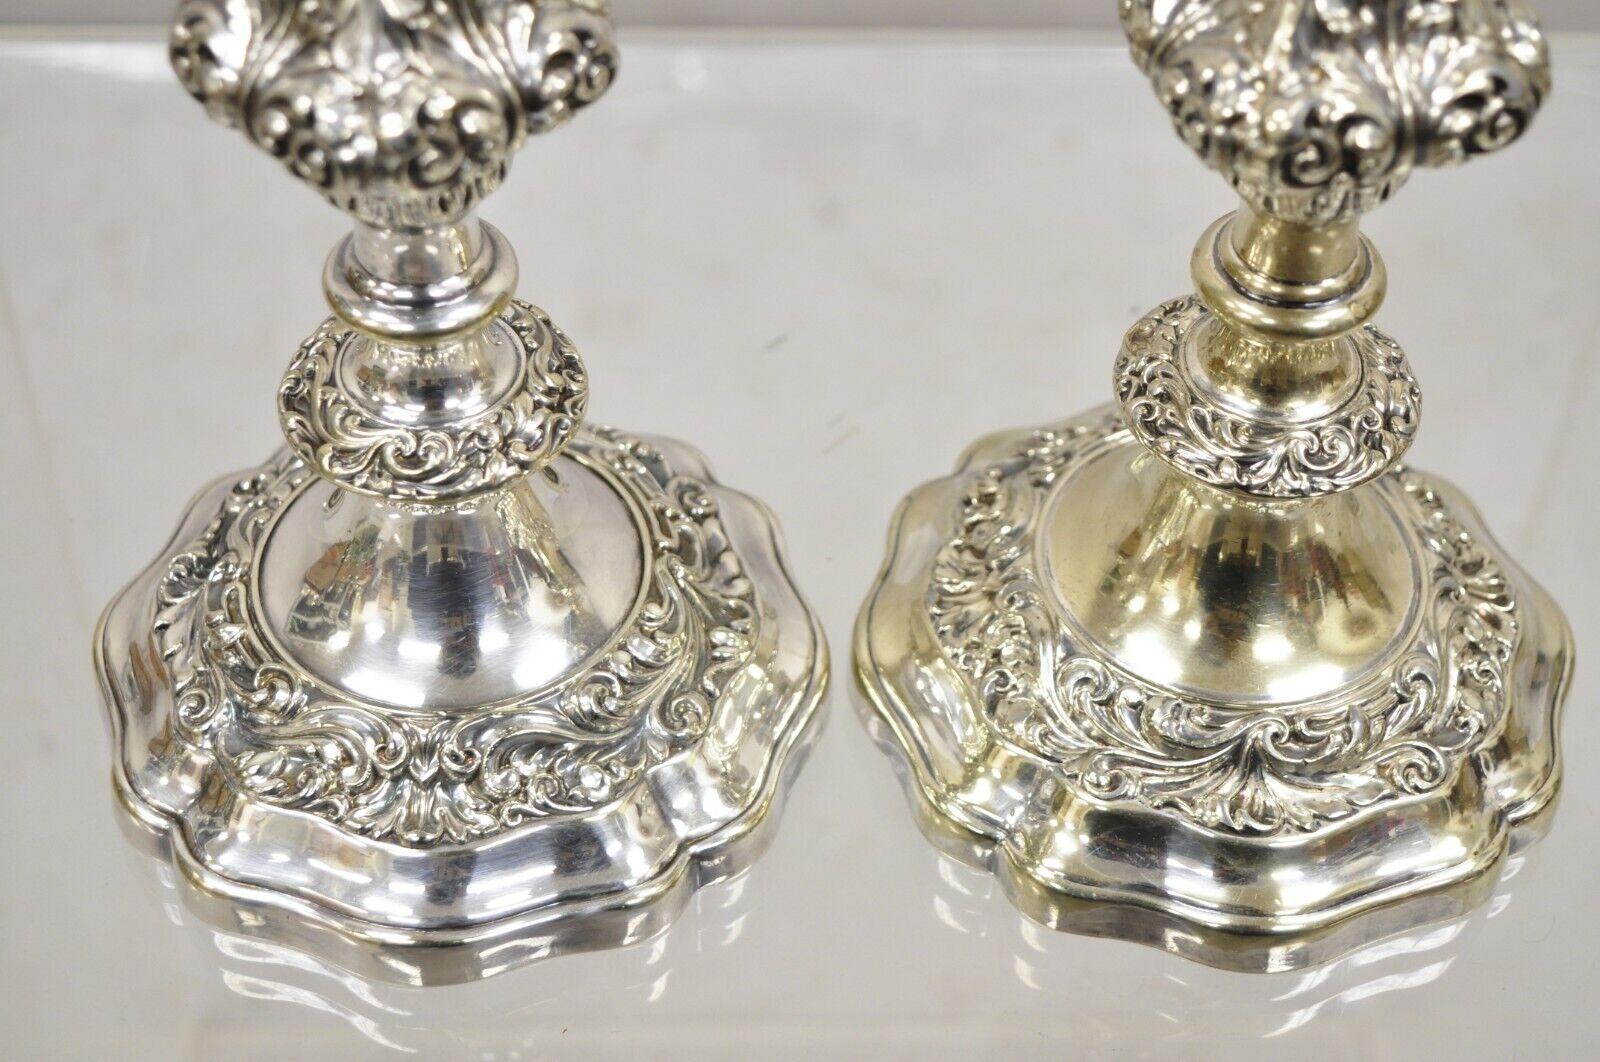 Vintage Gorham Baroque Repousse Silver Plated Single Candle Candlesticks a Pair For Sale 2